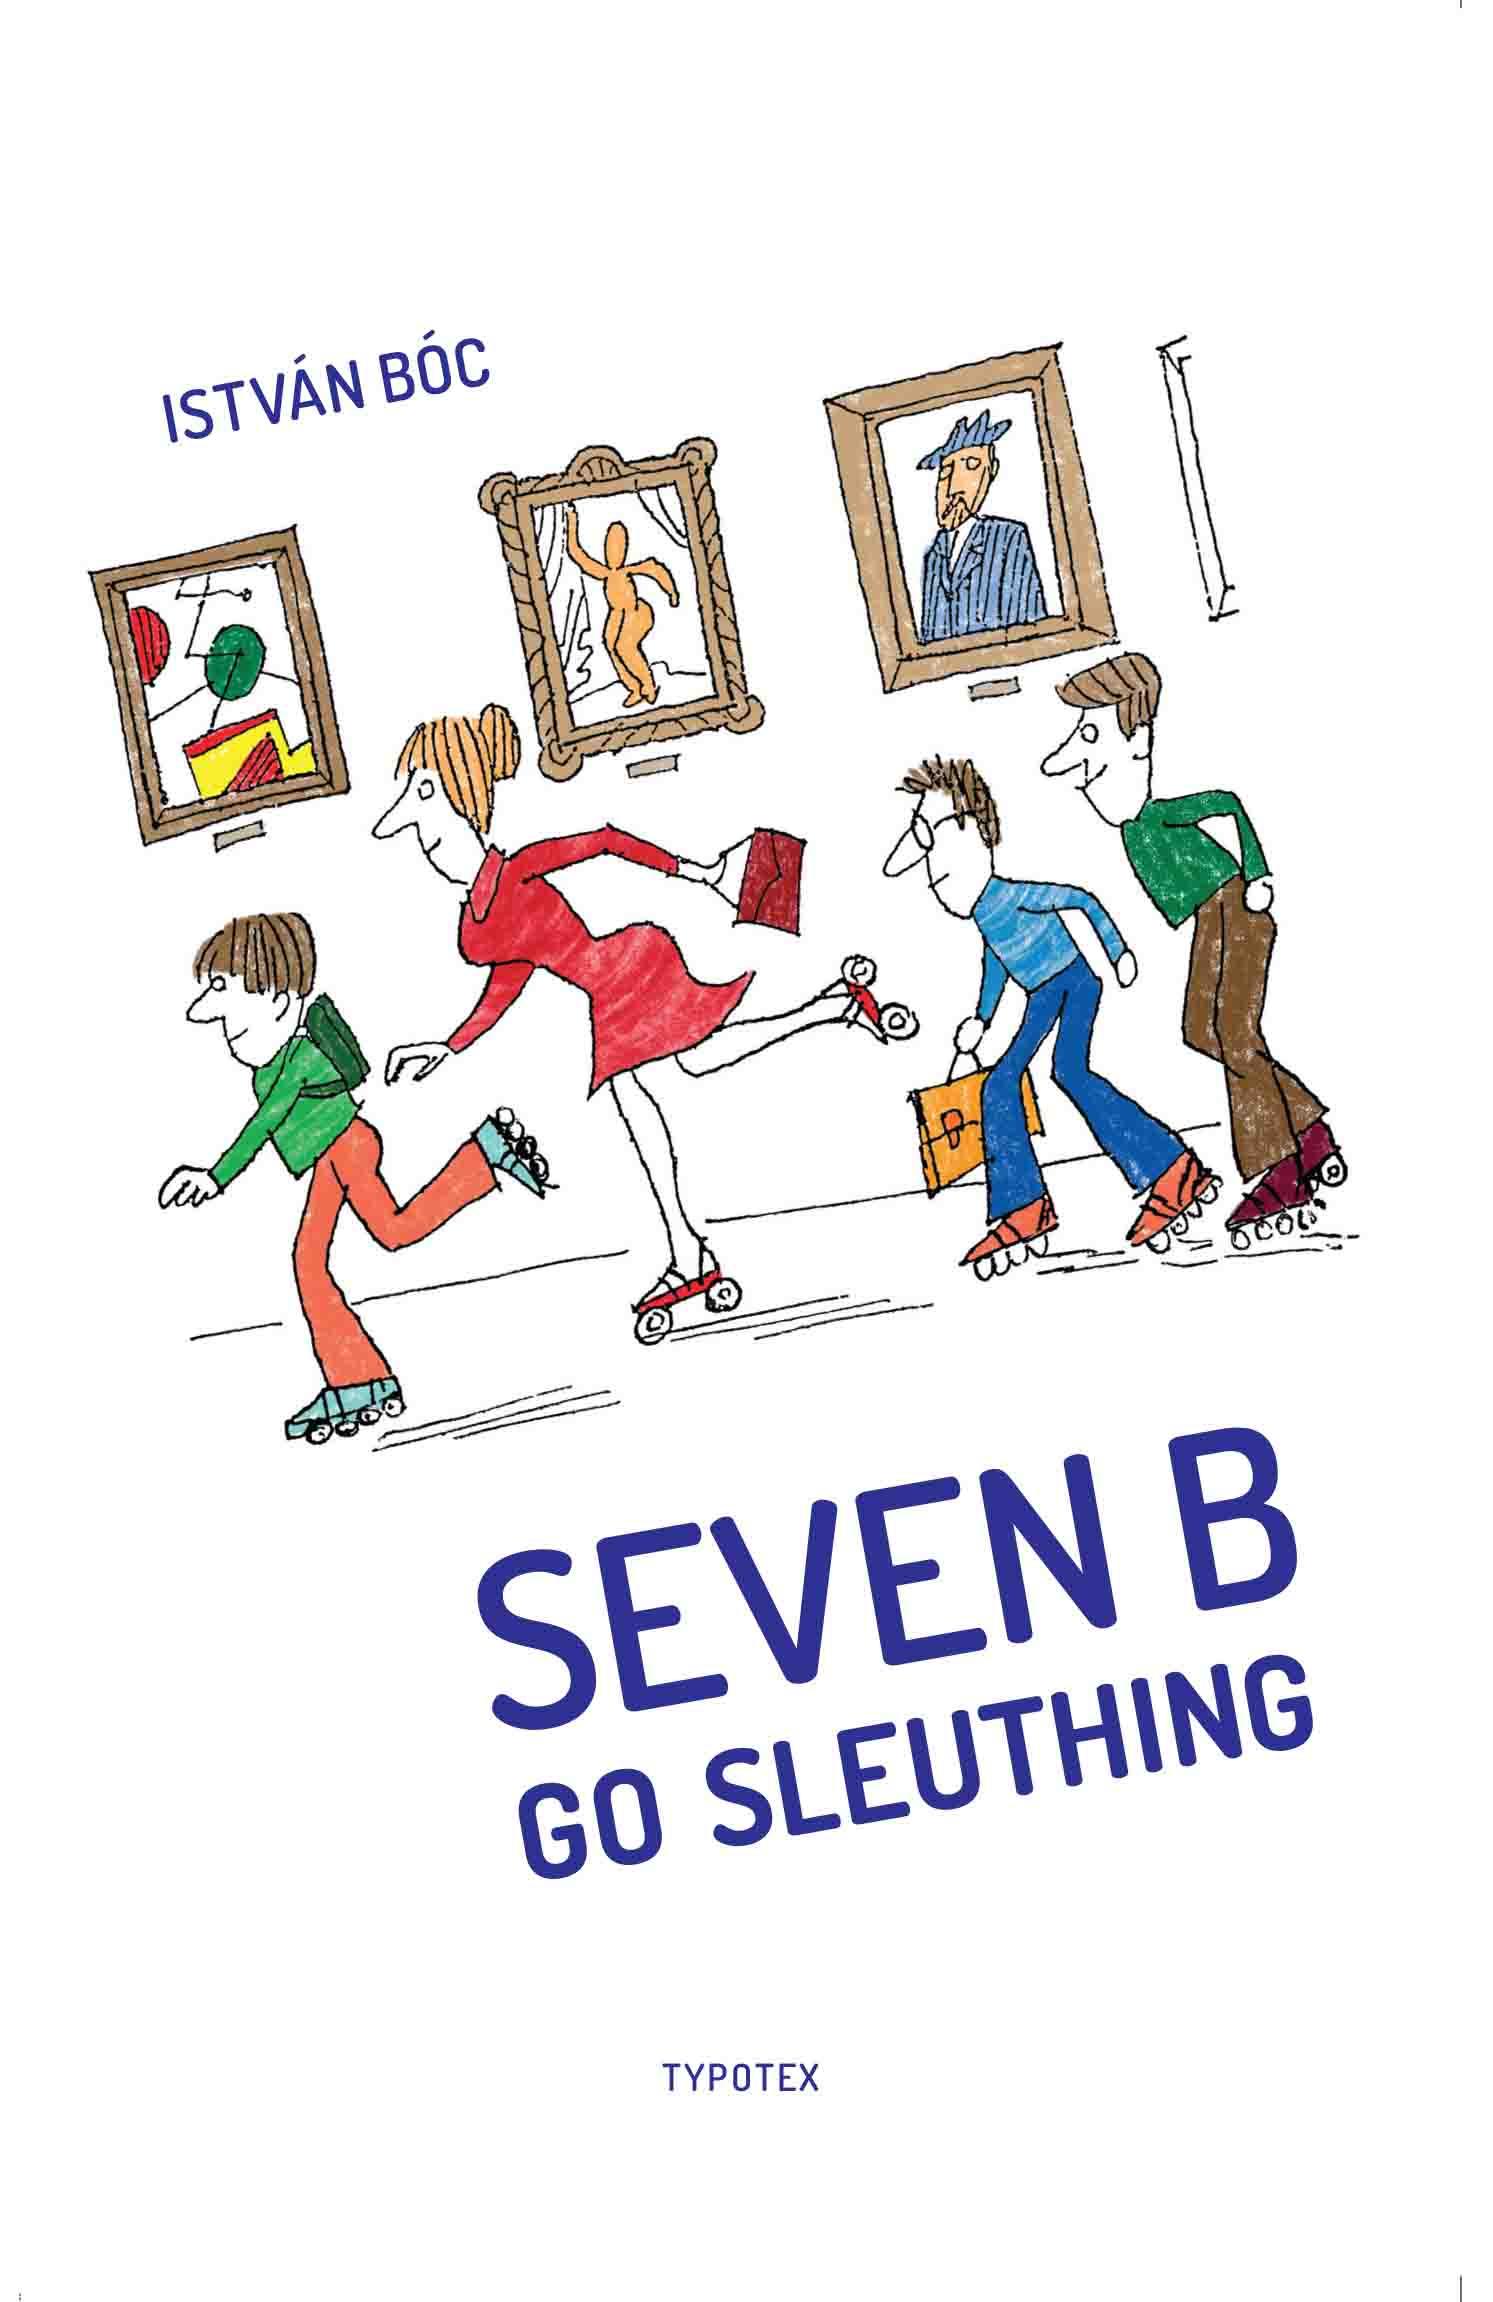 SEVEN B GO SLEUTHING